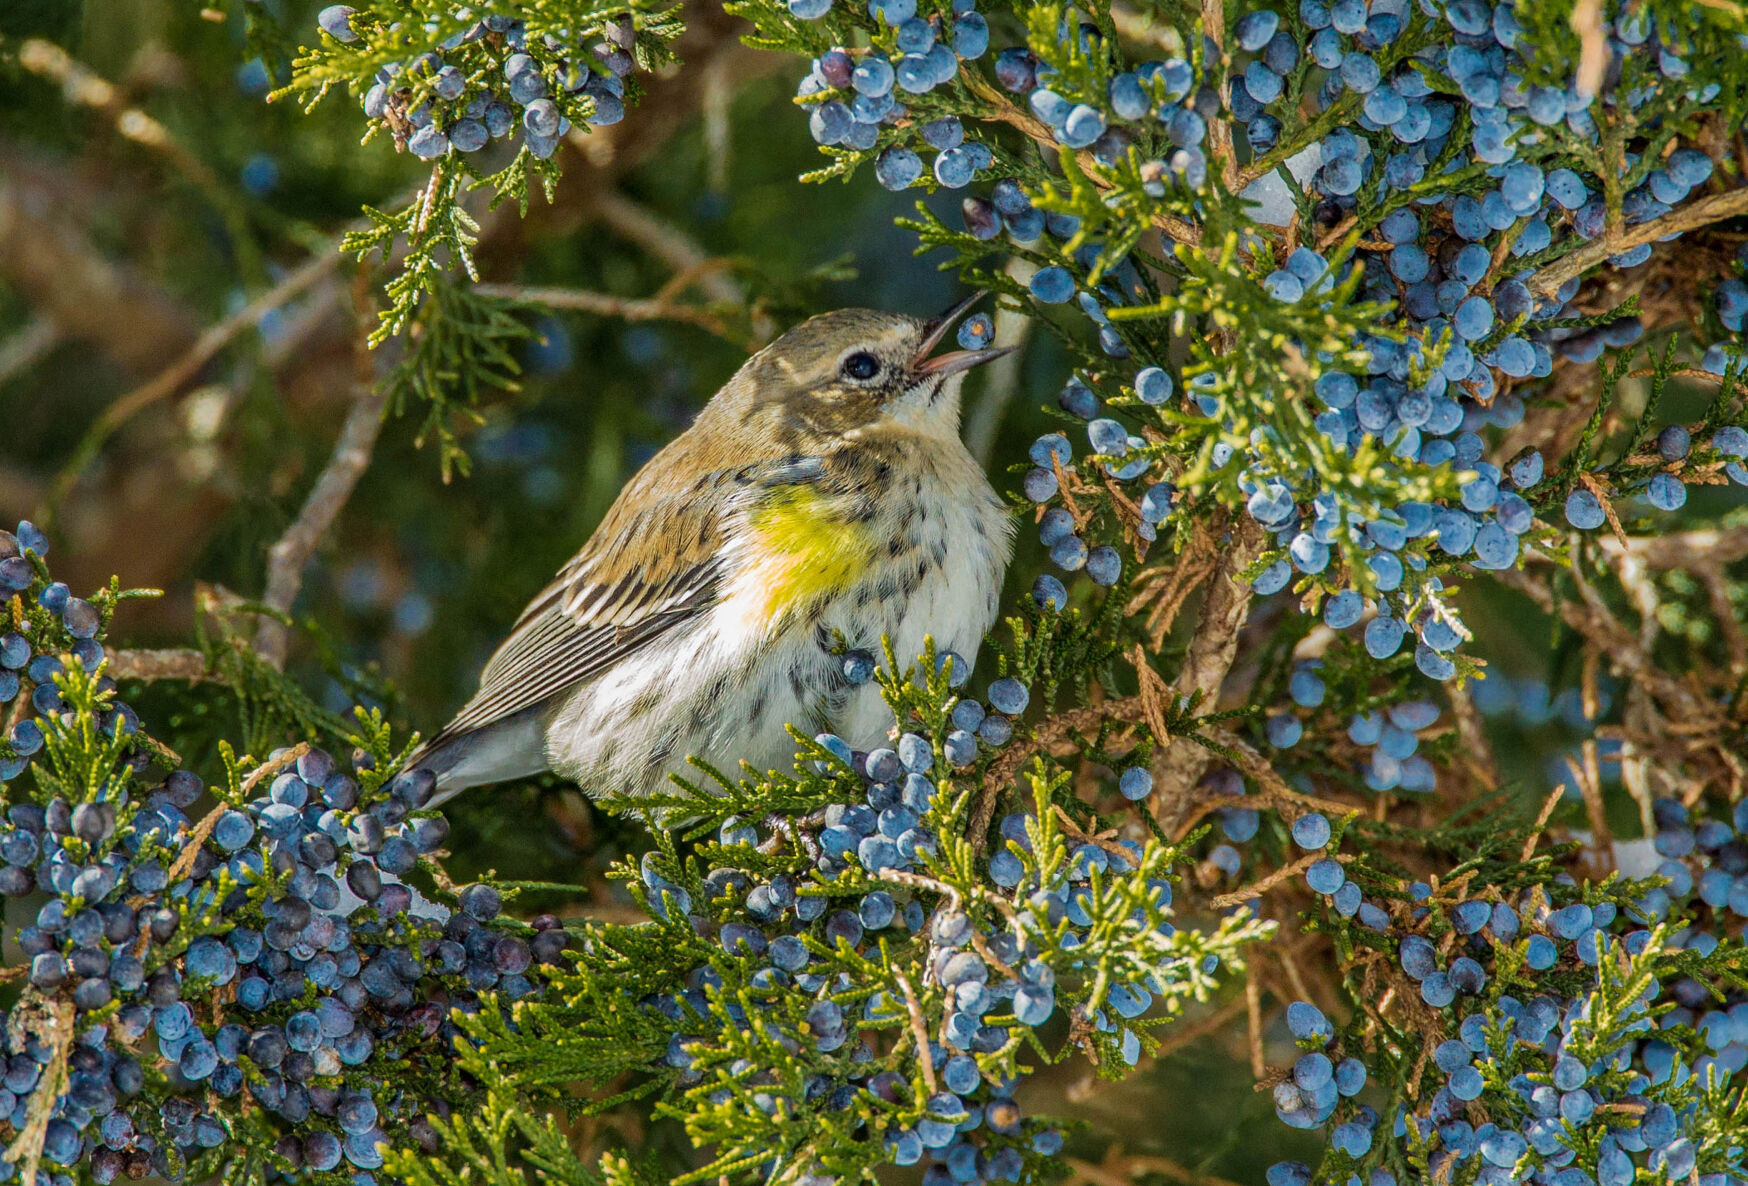 A Warbler wave can transform a part of the Vermont woods into an outdoor aviary with hundreds of neo-tropical bird species compressed into an area of only an acre or less. Photo provided by Metro Creative Connection.